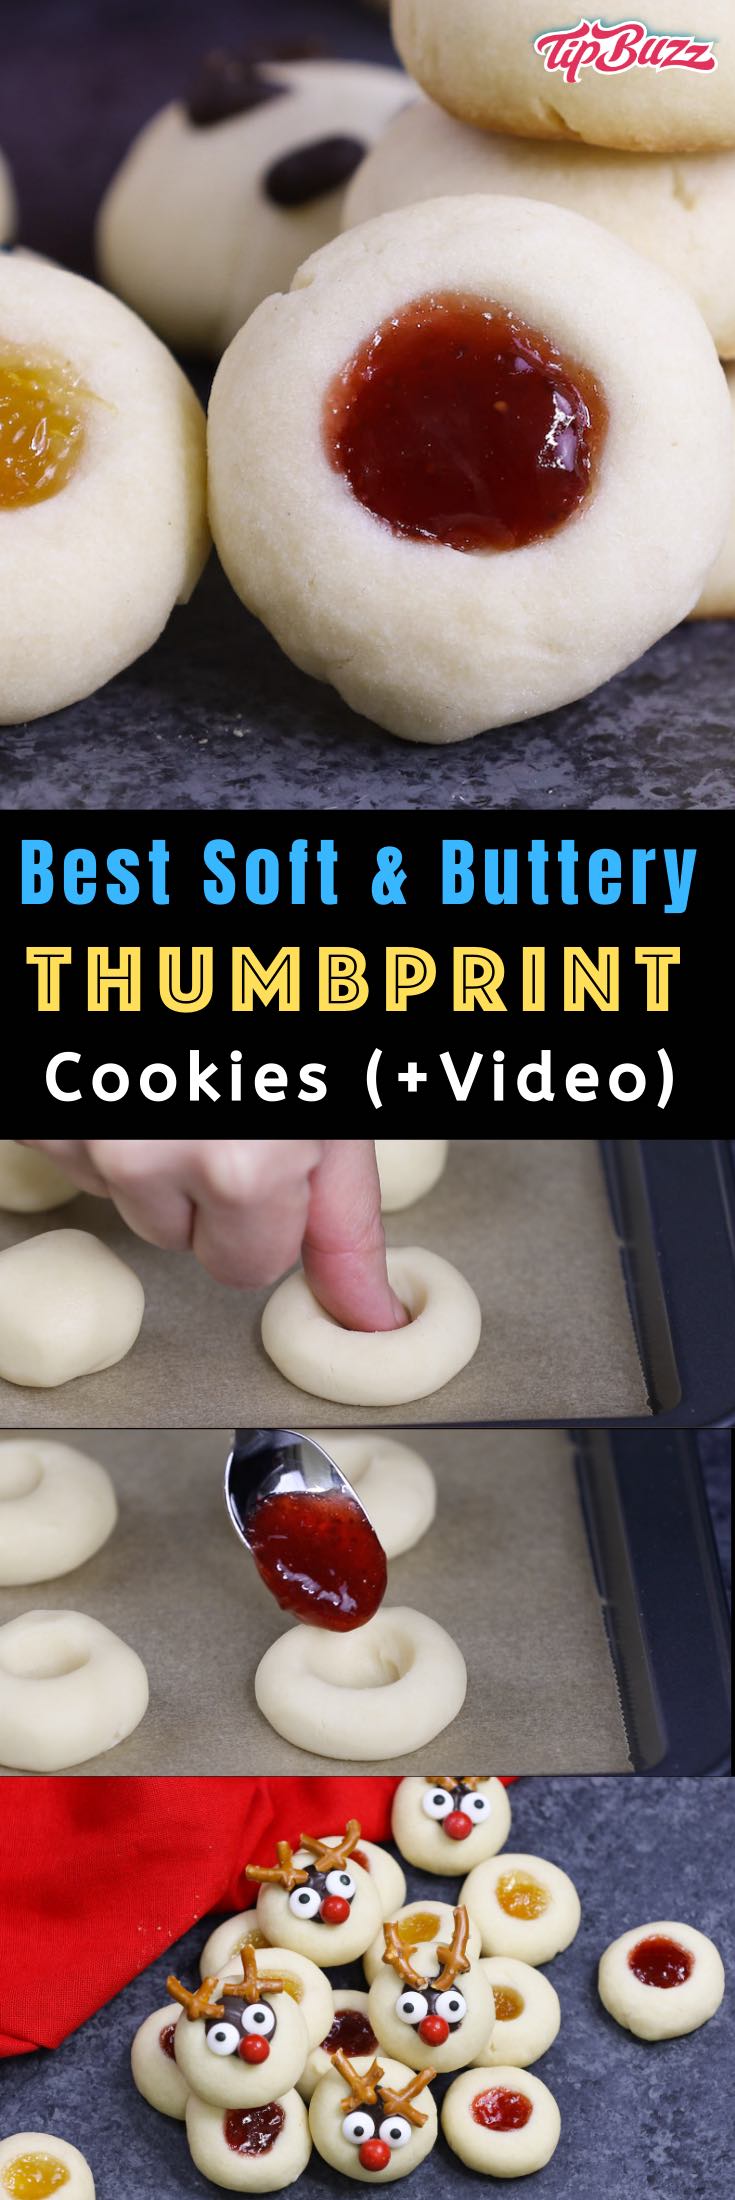 Thumbprint Cookies combine soft, buttery shortbread cookies with your favorite fillings for the perfect Christmas treat! The dough is made with just 5 simple ingredients, and then rolled into individual balls. Use your thumb to make an imprint before filling with your favorite jam, chocolate or other delicious fillings!